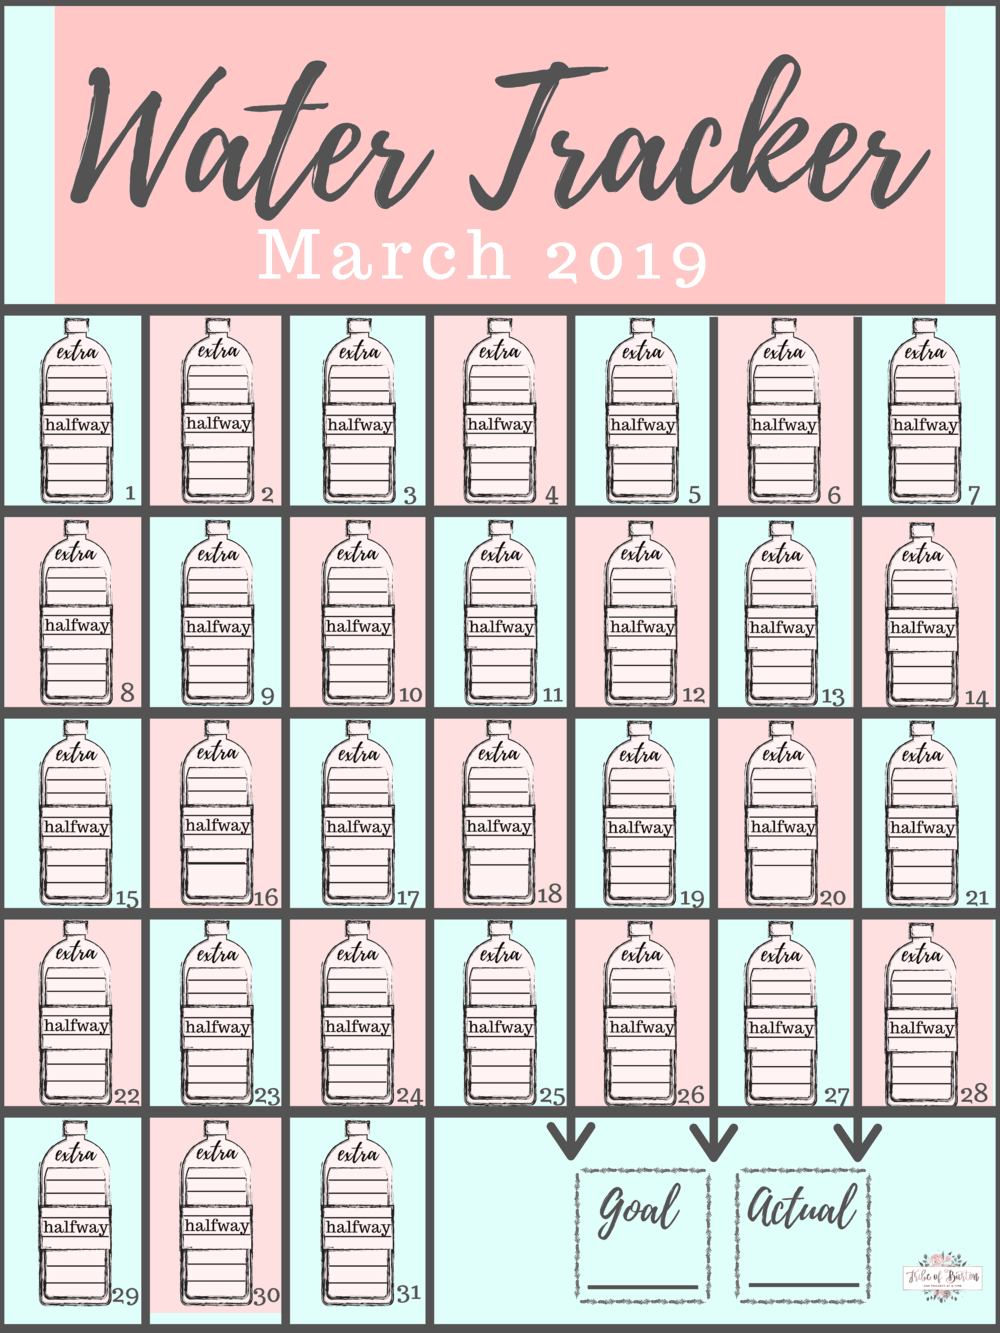 Water tracker March 2019